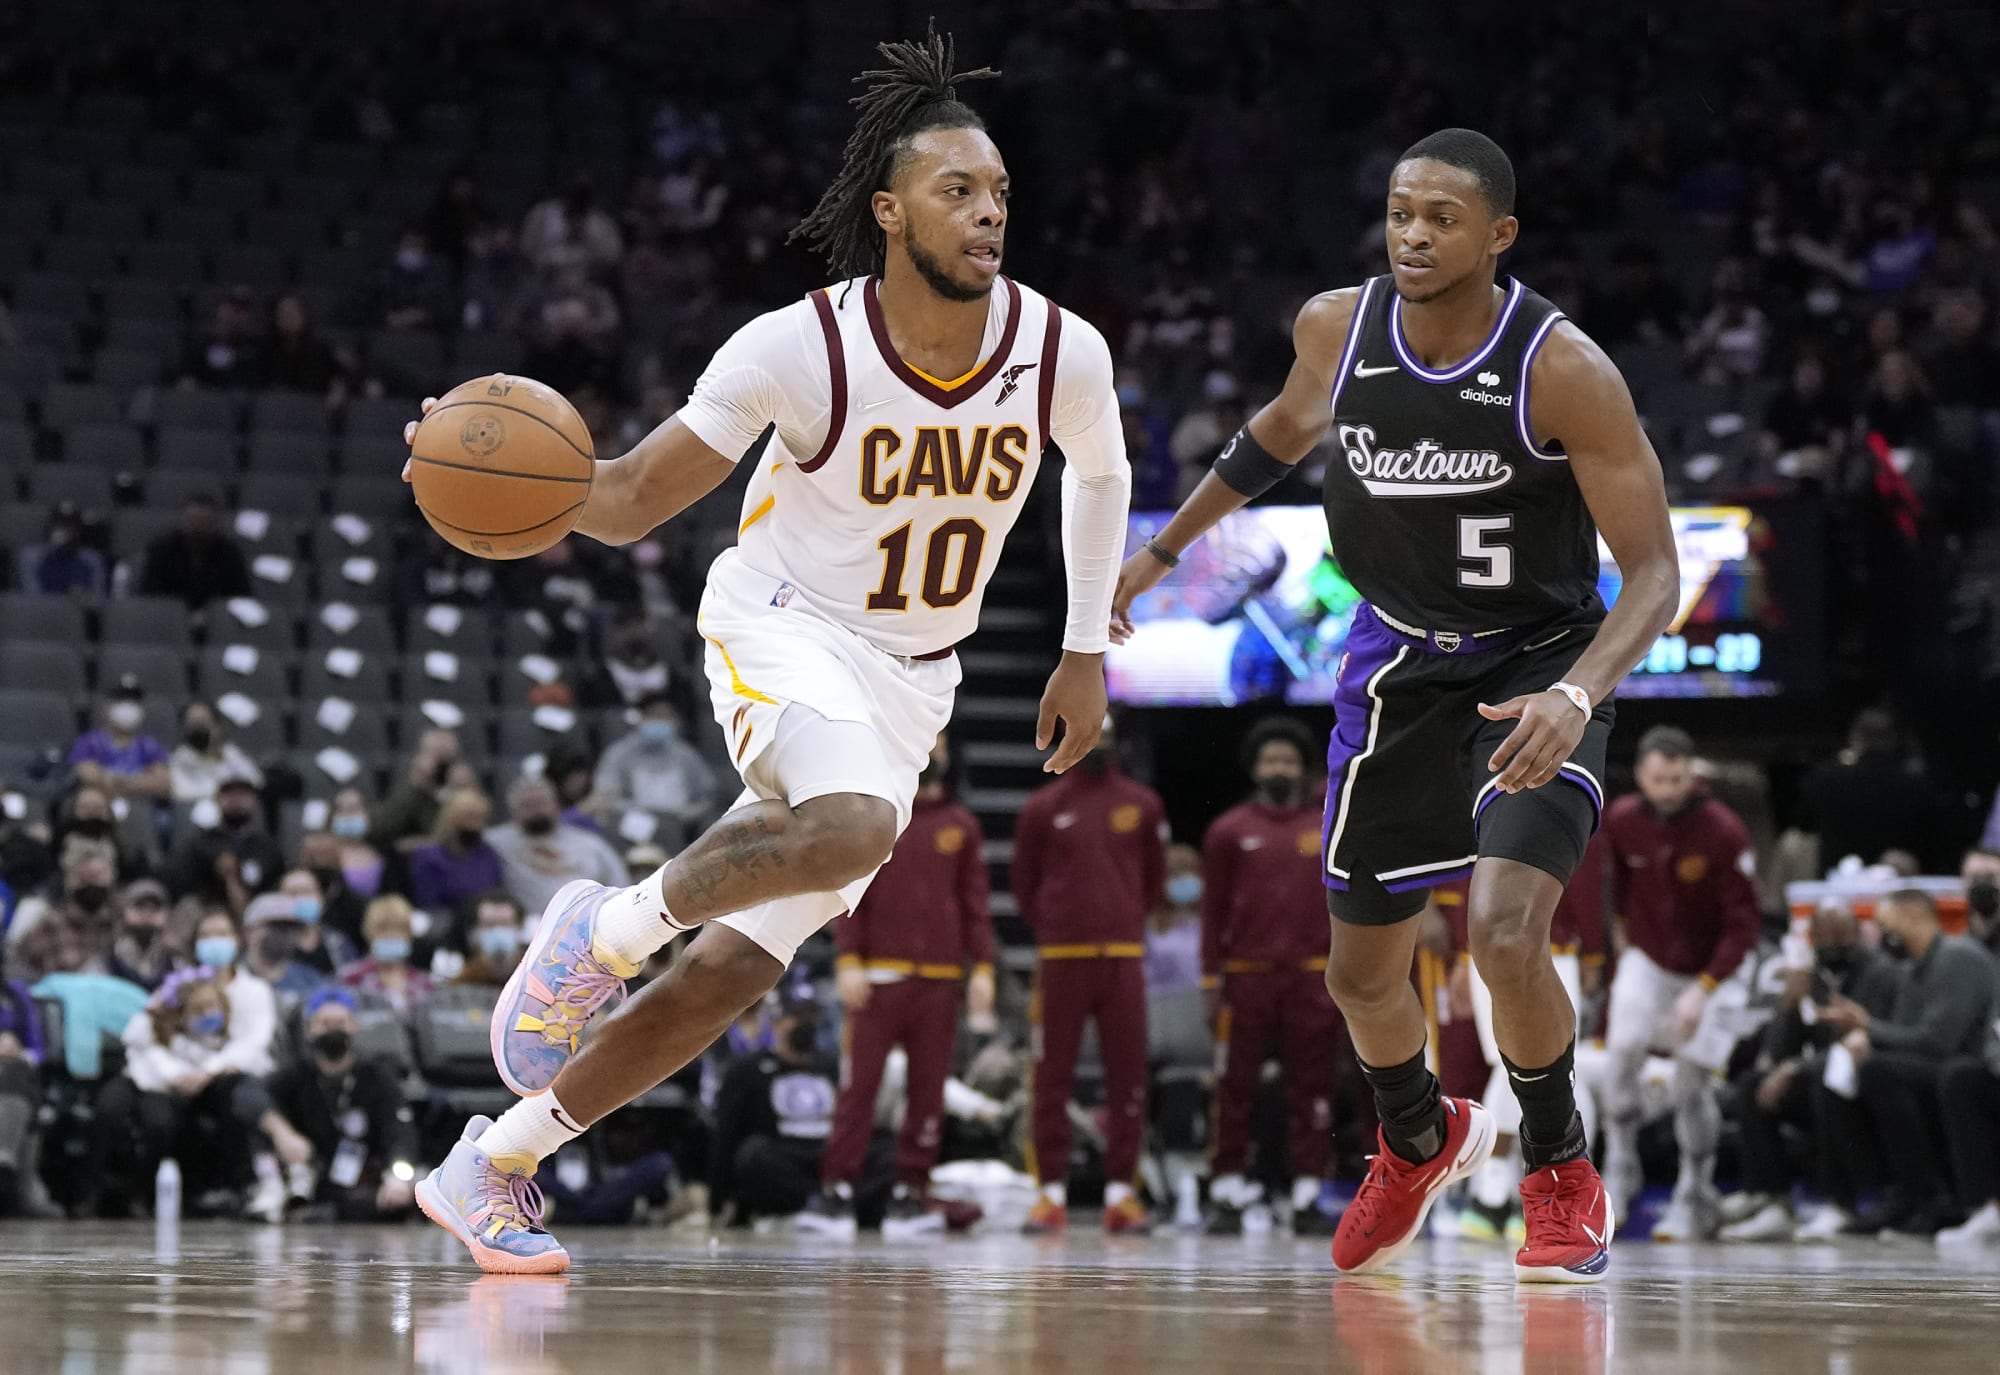 Cavs’ Garland slots in at No. 37 in CBS NBA Top 100; seems a bit low